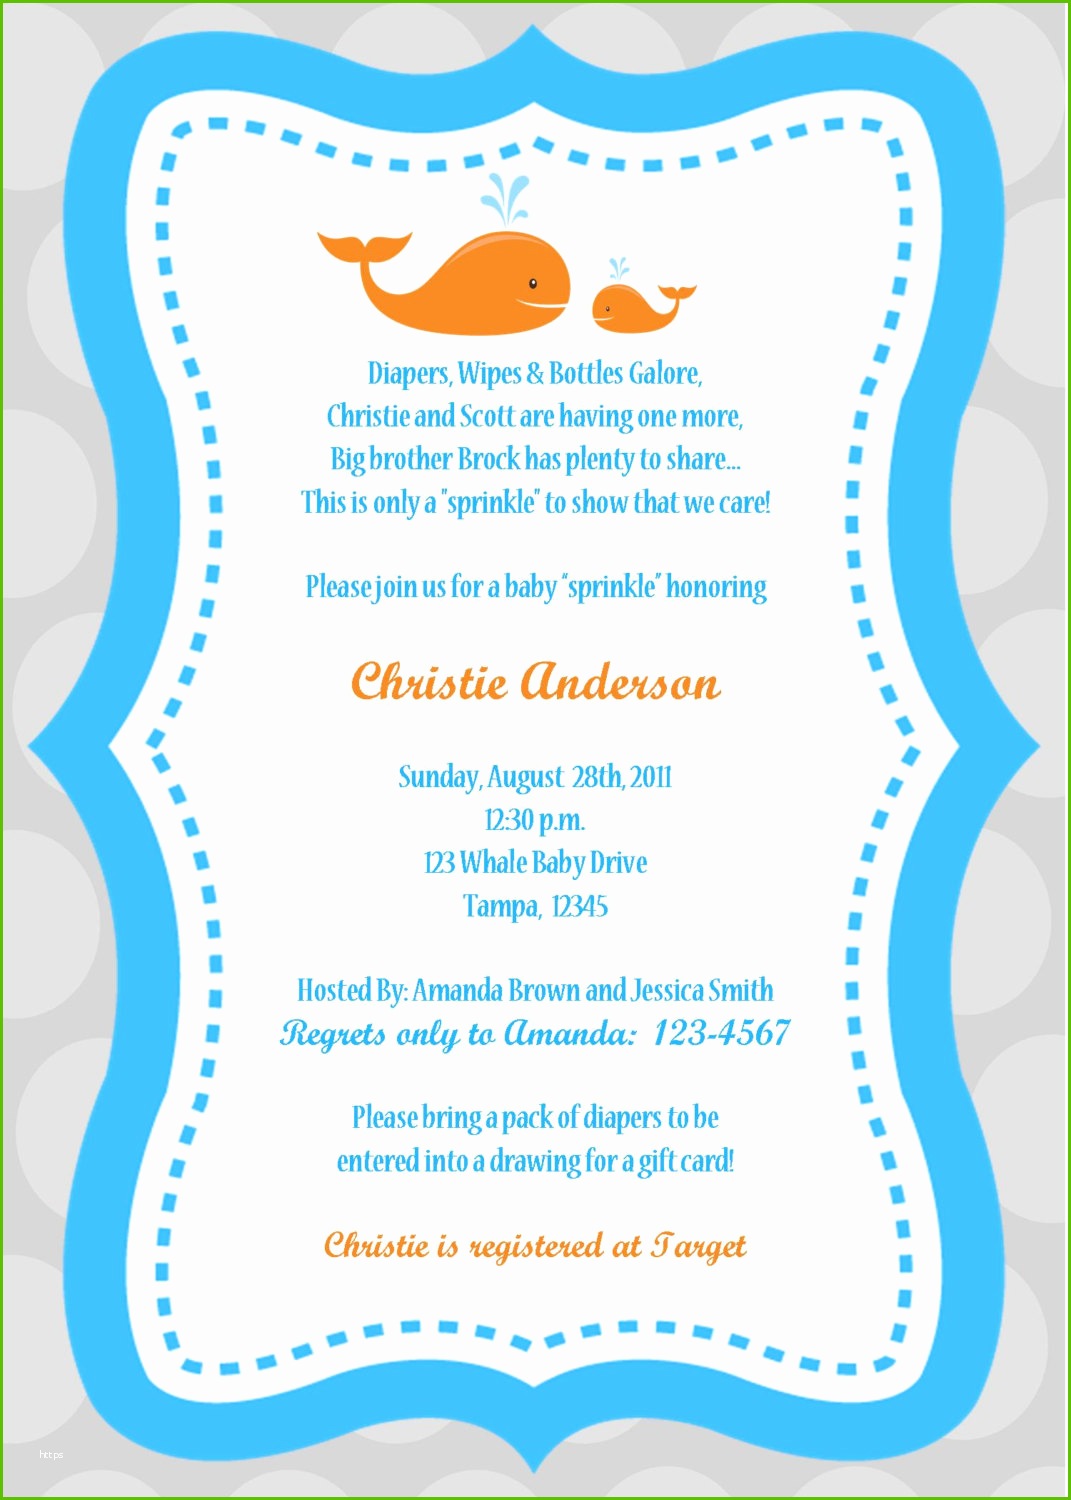 Full Size of Baby Shower:delightful Baby Shower Invitation Wording Picture Designs Baby Shower Invitation Wording Who To Invite To Baby Shower Astonishing Baby Shower Invitation Wording For A Boy